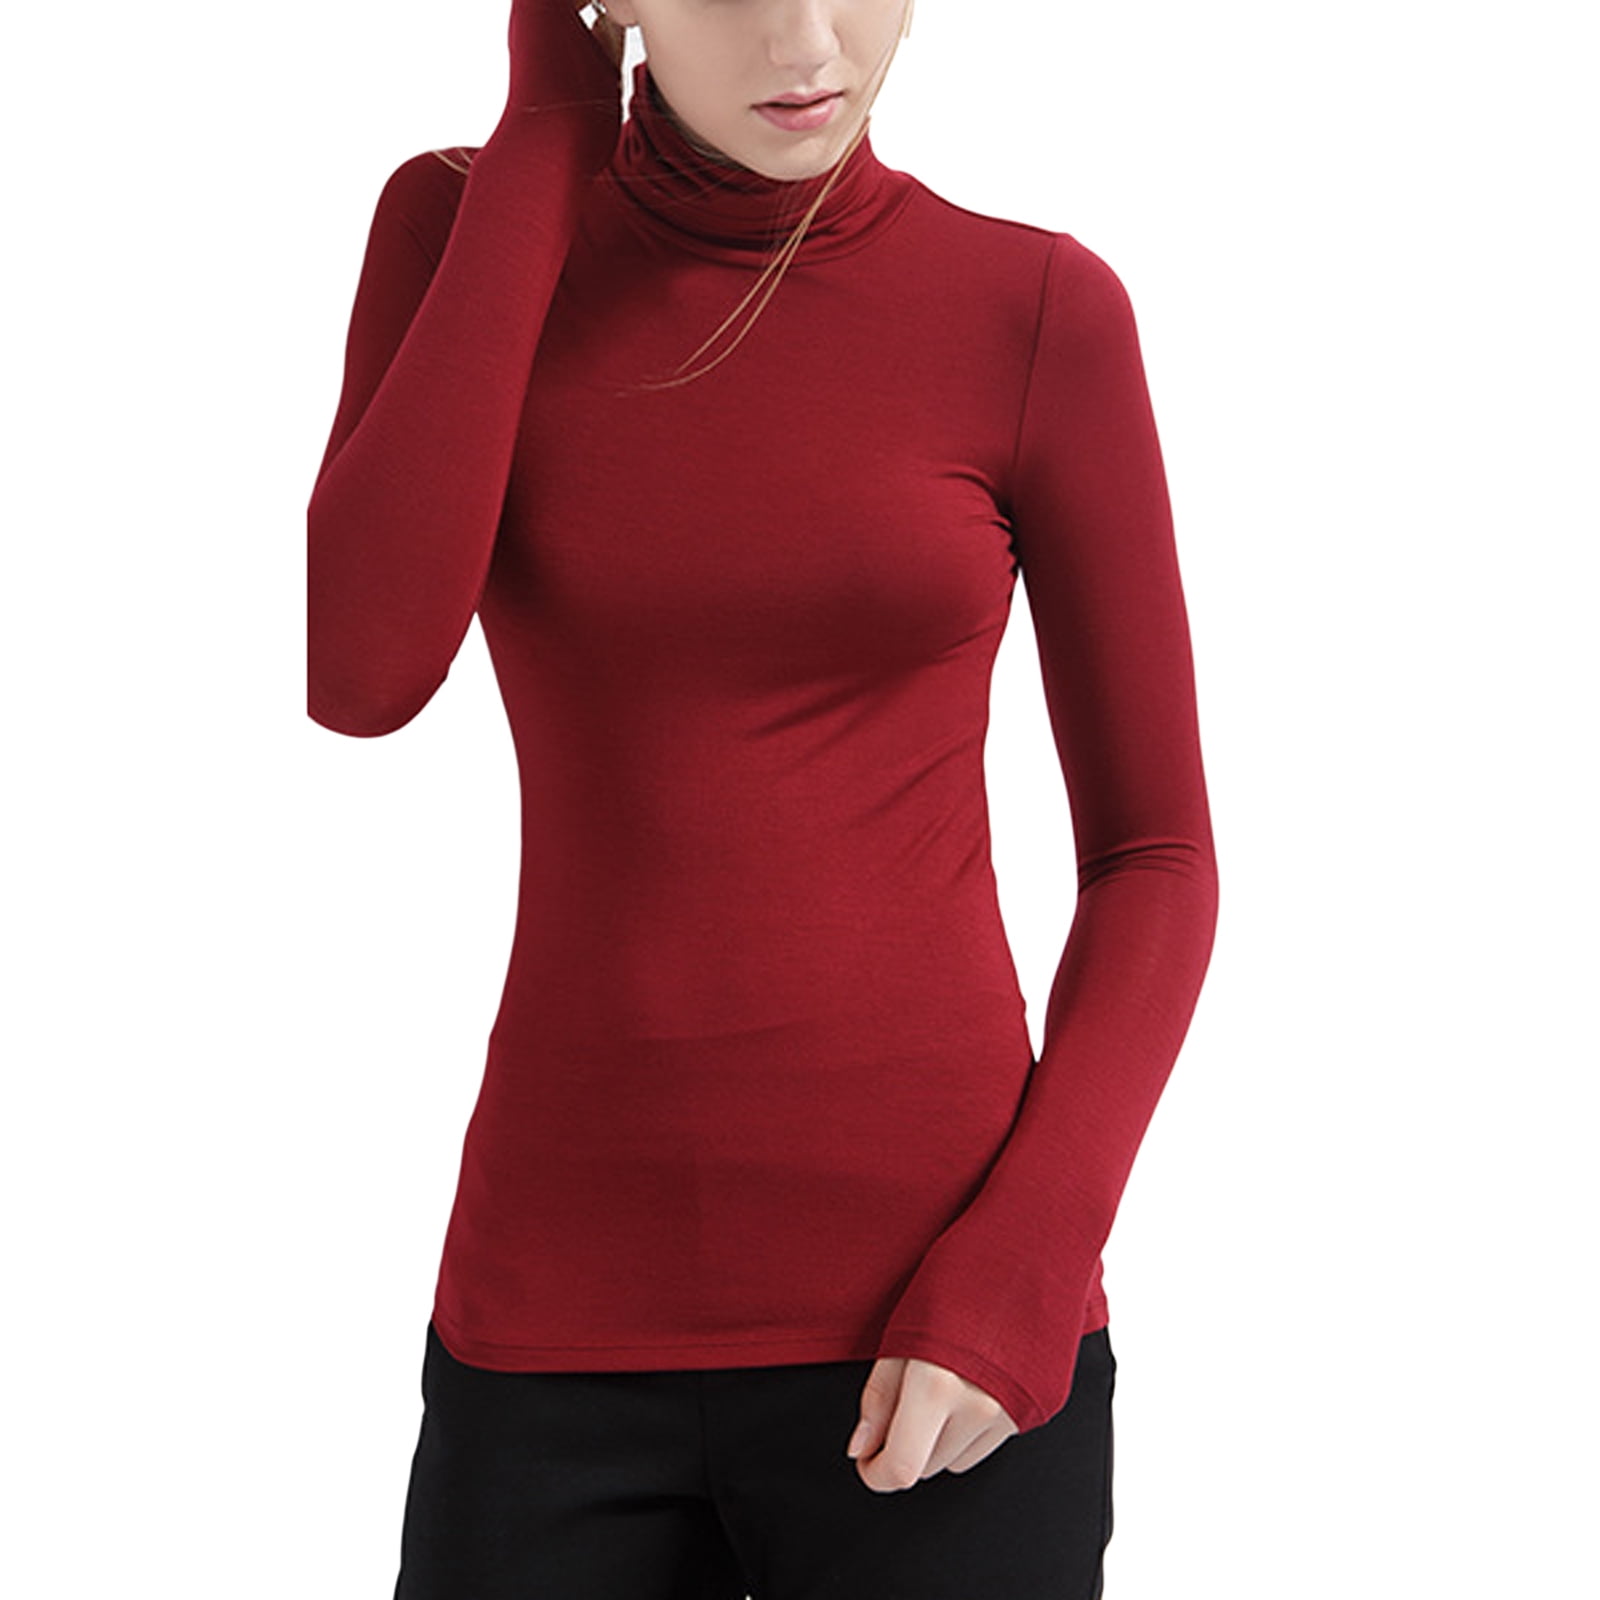 Shirts Soft Pullover, Base Sleeve Layer Slim Long Fitted Modal Musuos Turtleneck Women\'s Tops Stretchy Base